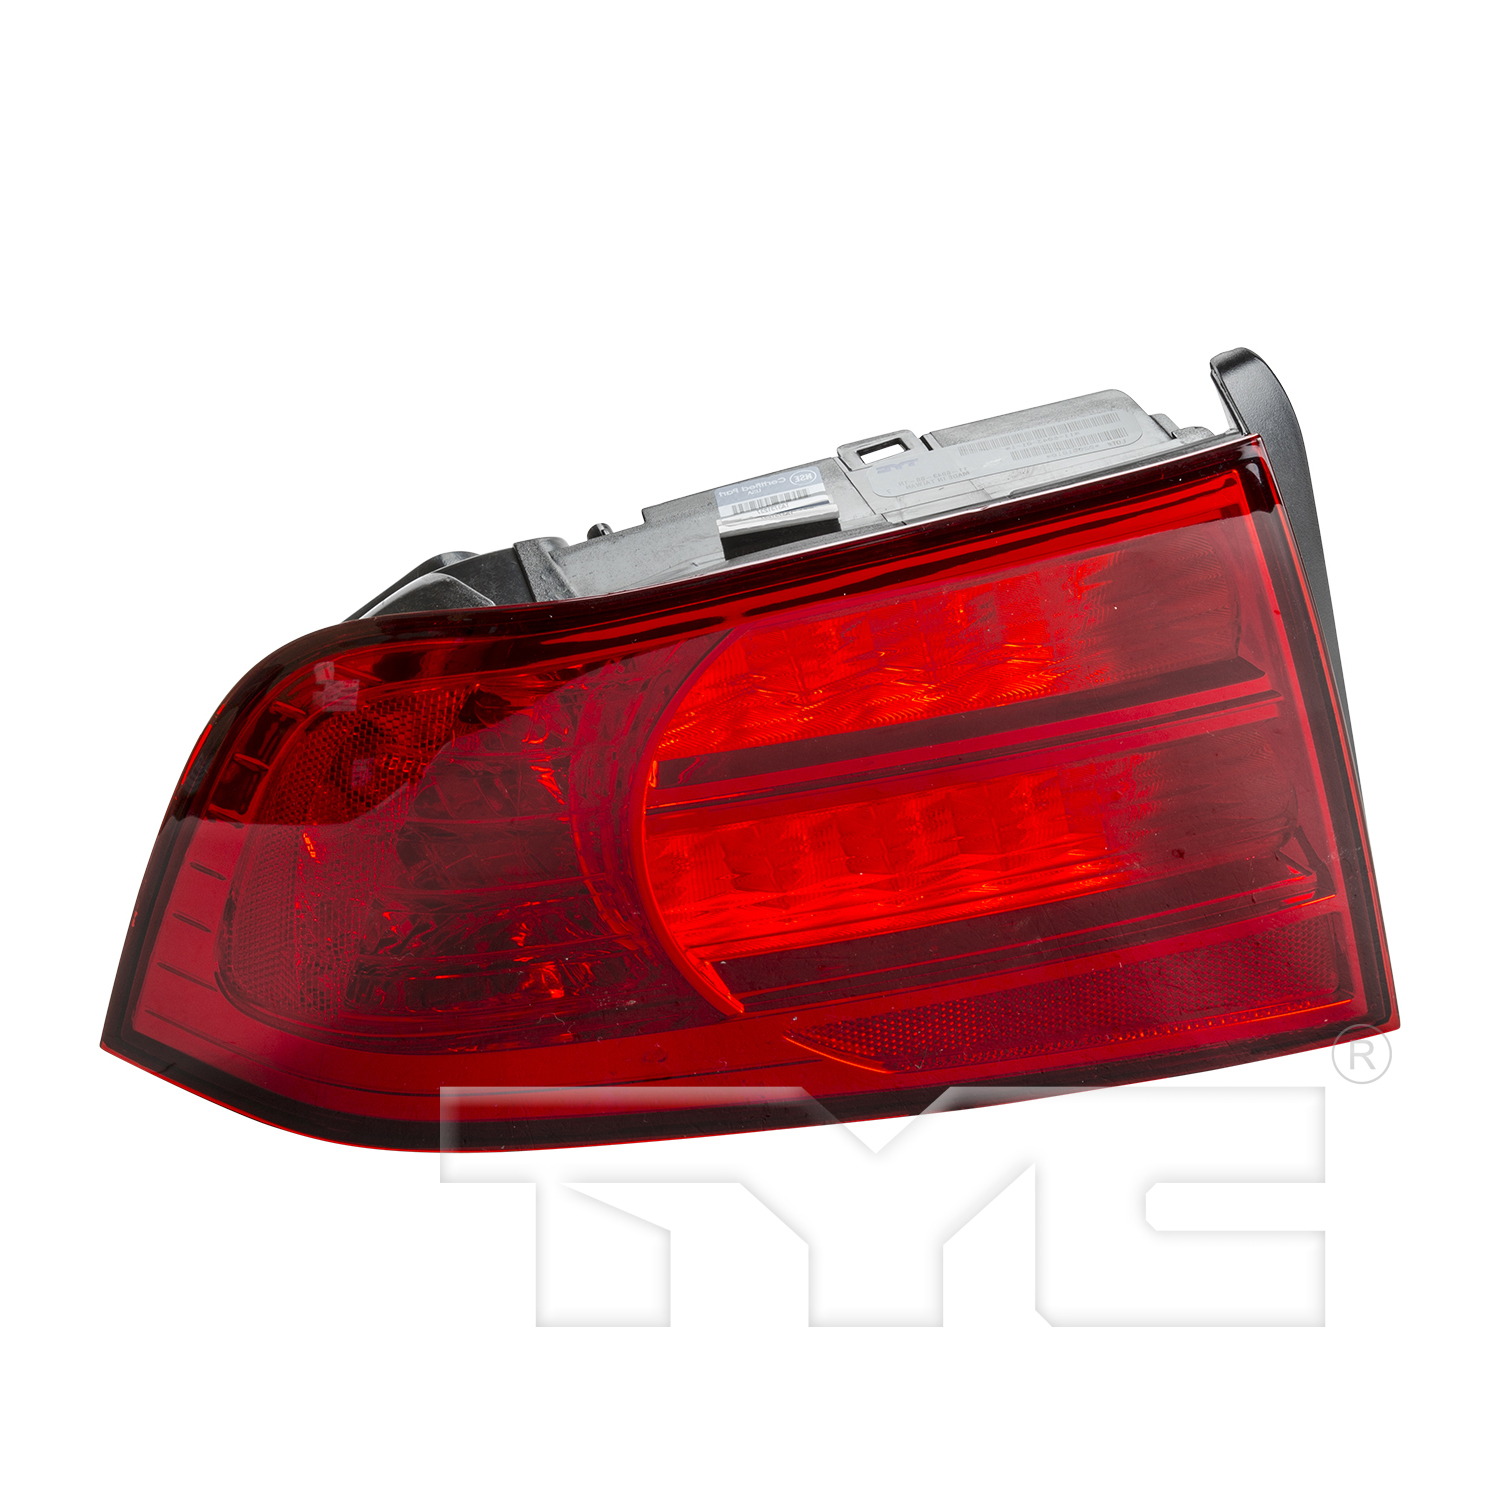 Aftermarket TAILLIGHTS for ACURA - TL, TL,04-06,LT Taillamp lens/housing